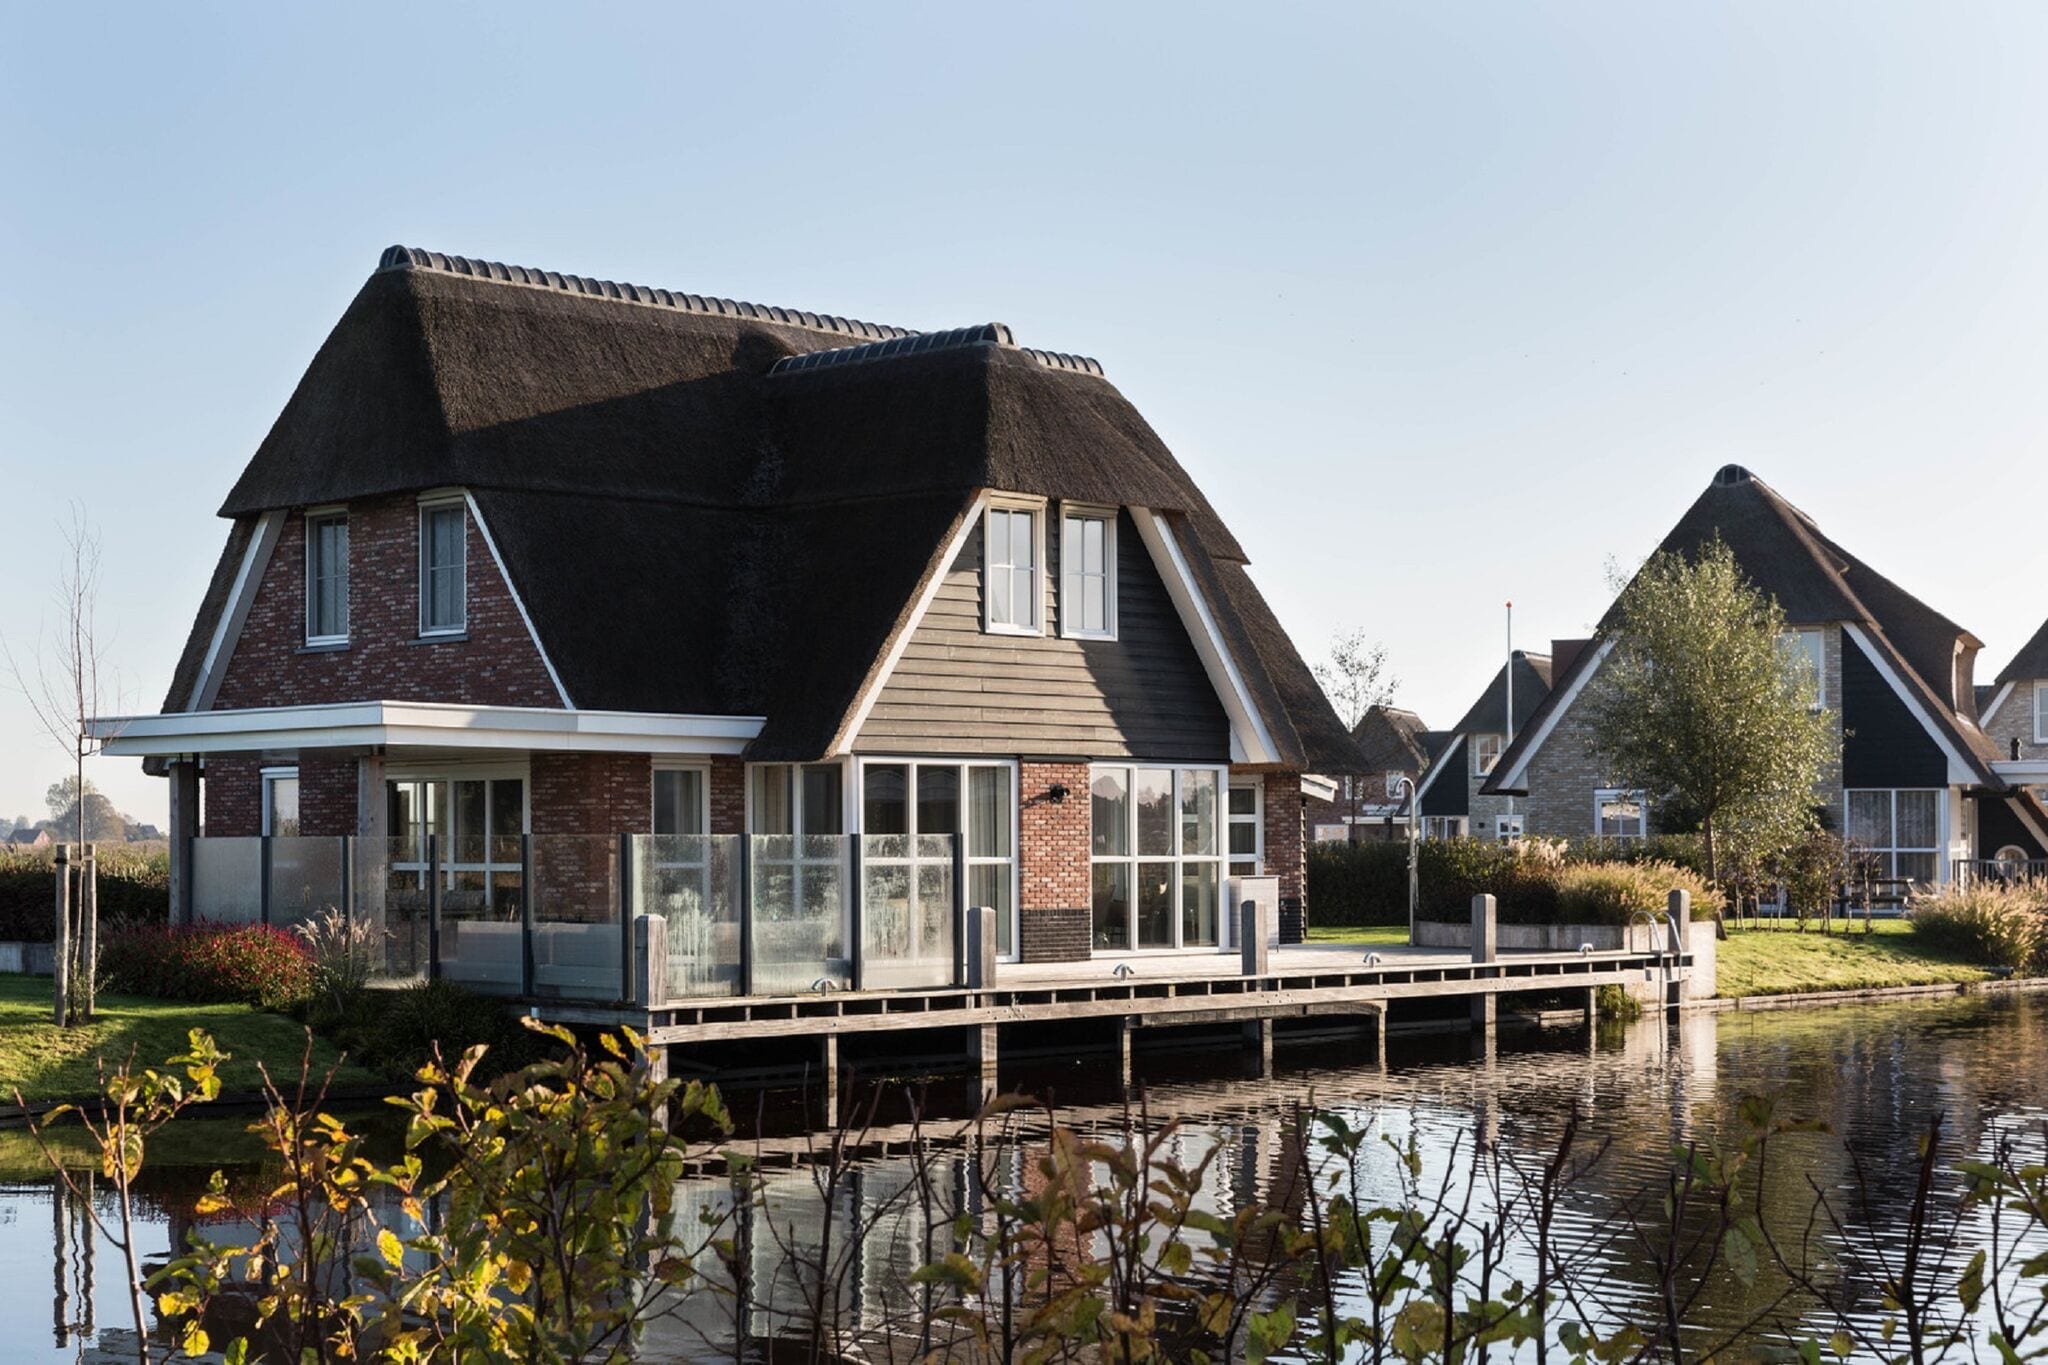 Thatched Villa with a sauna at Tjeukemeer